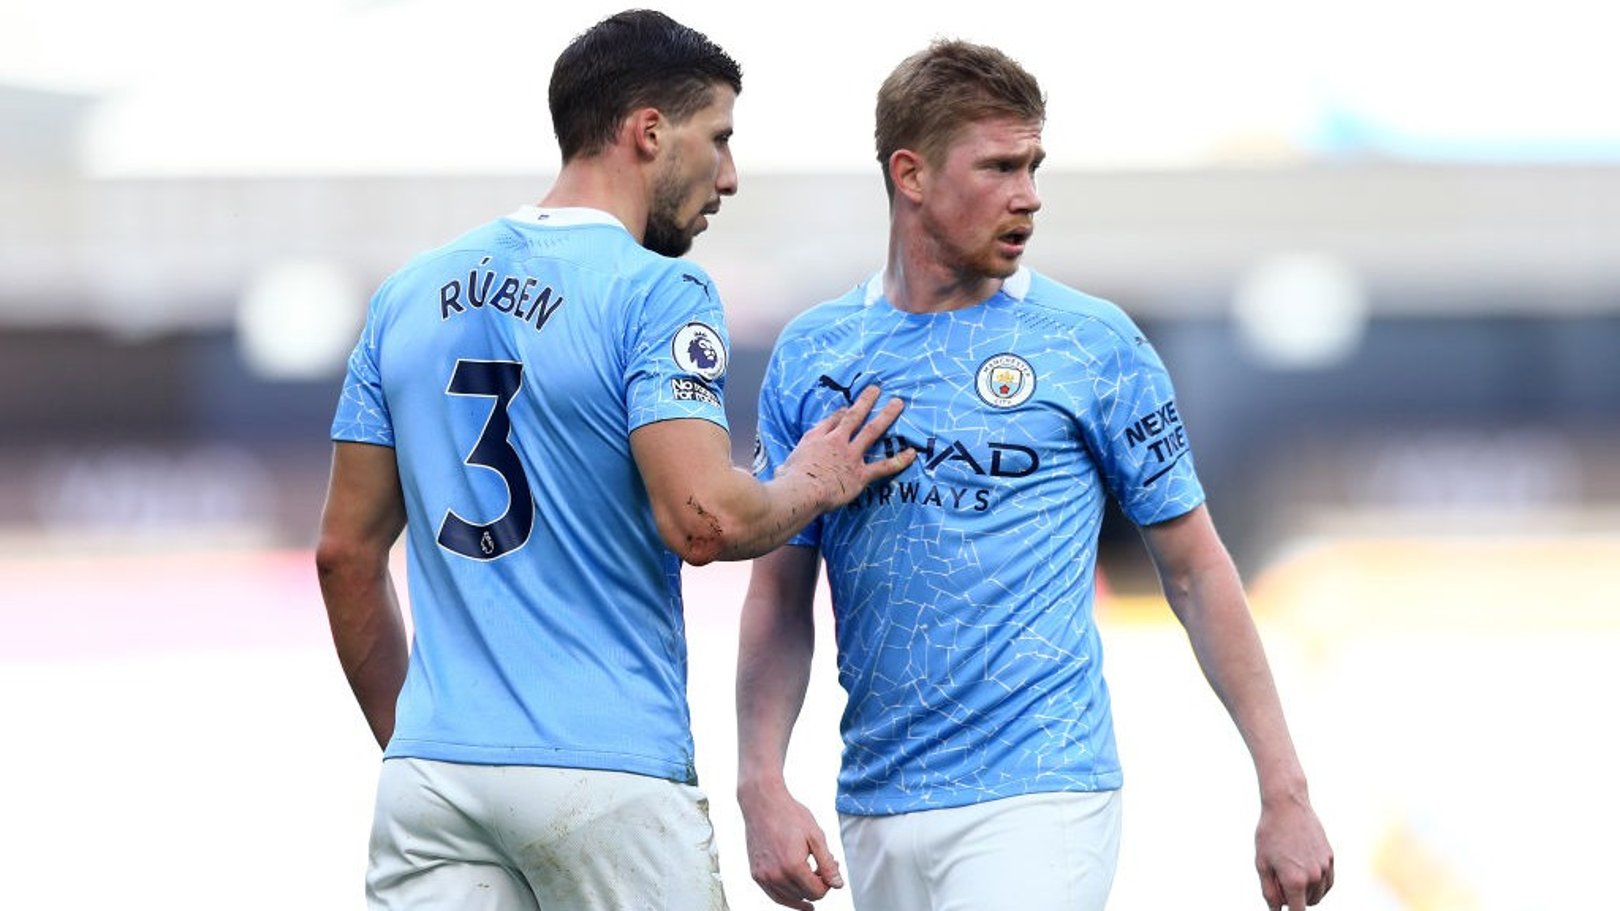 City duo nominated for Premier League Player of the Season